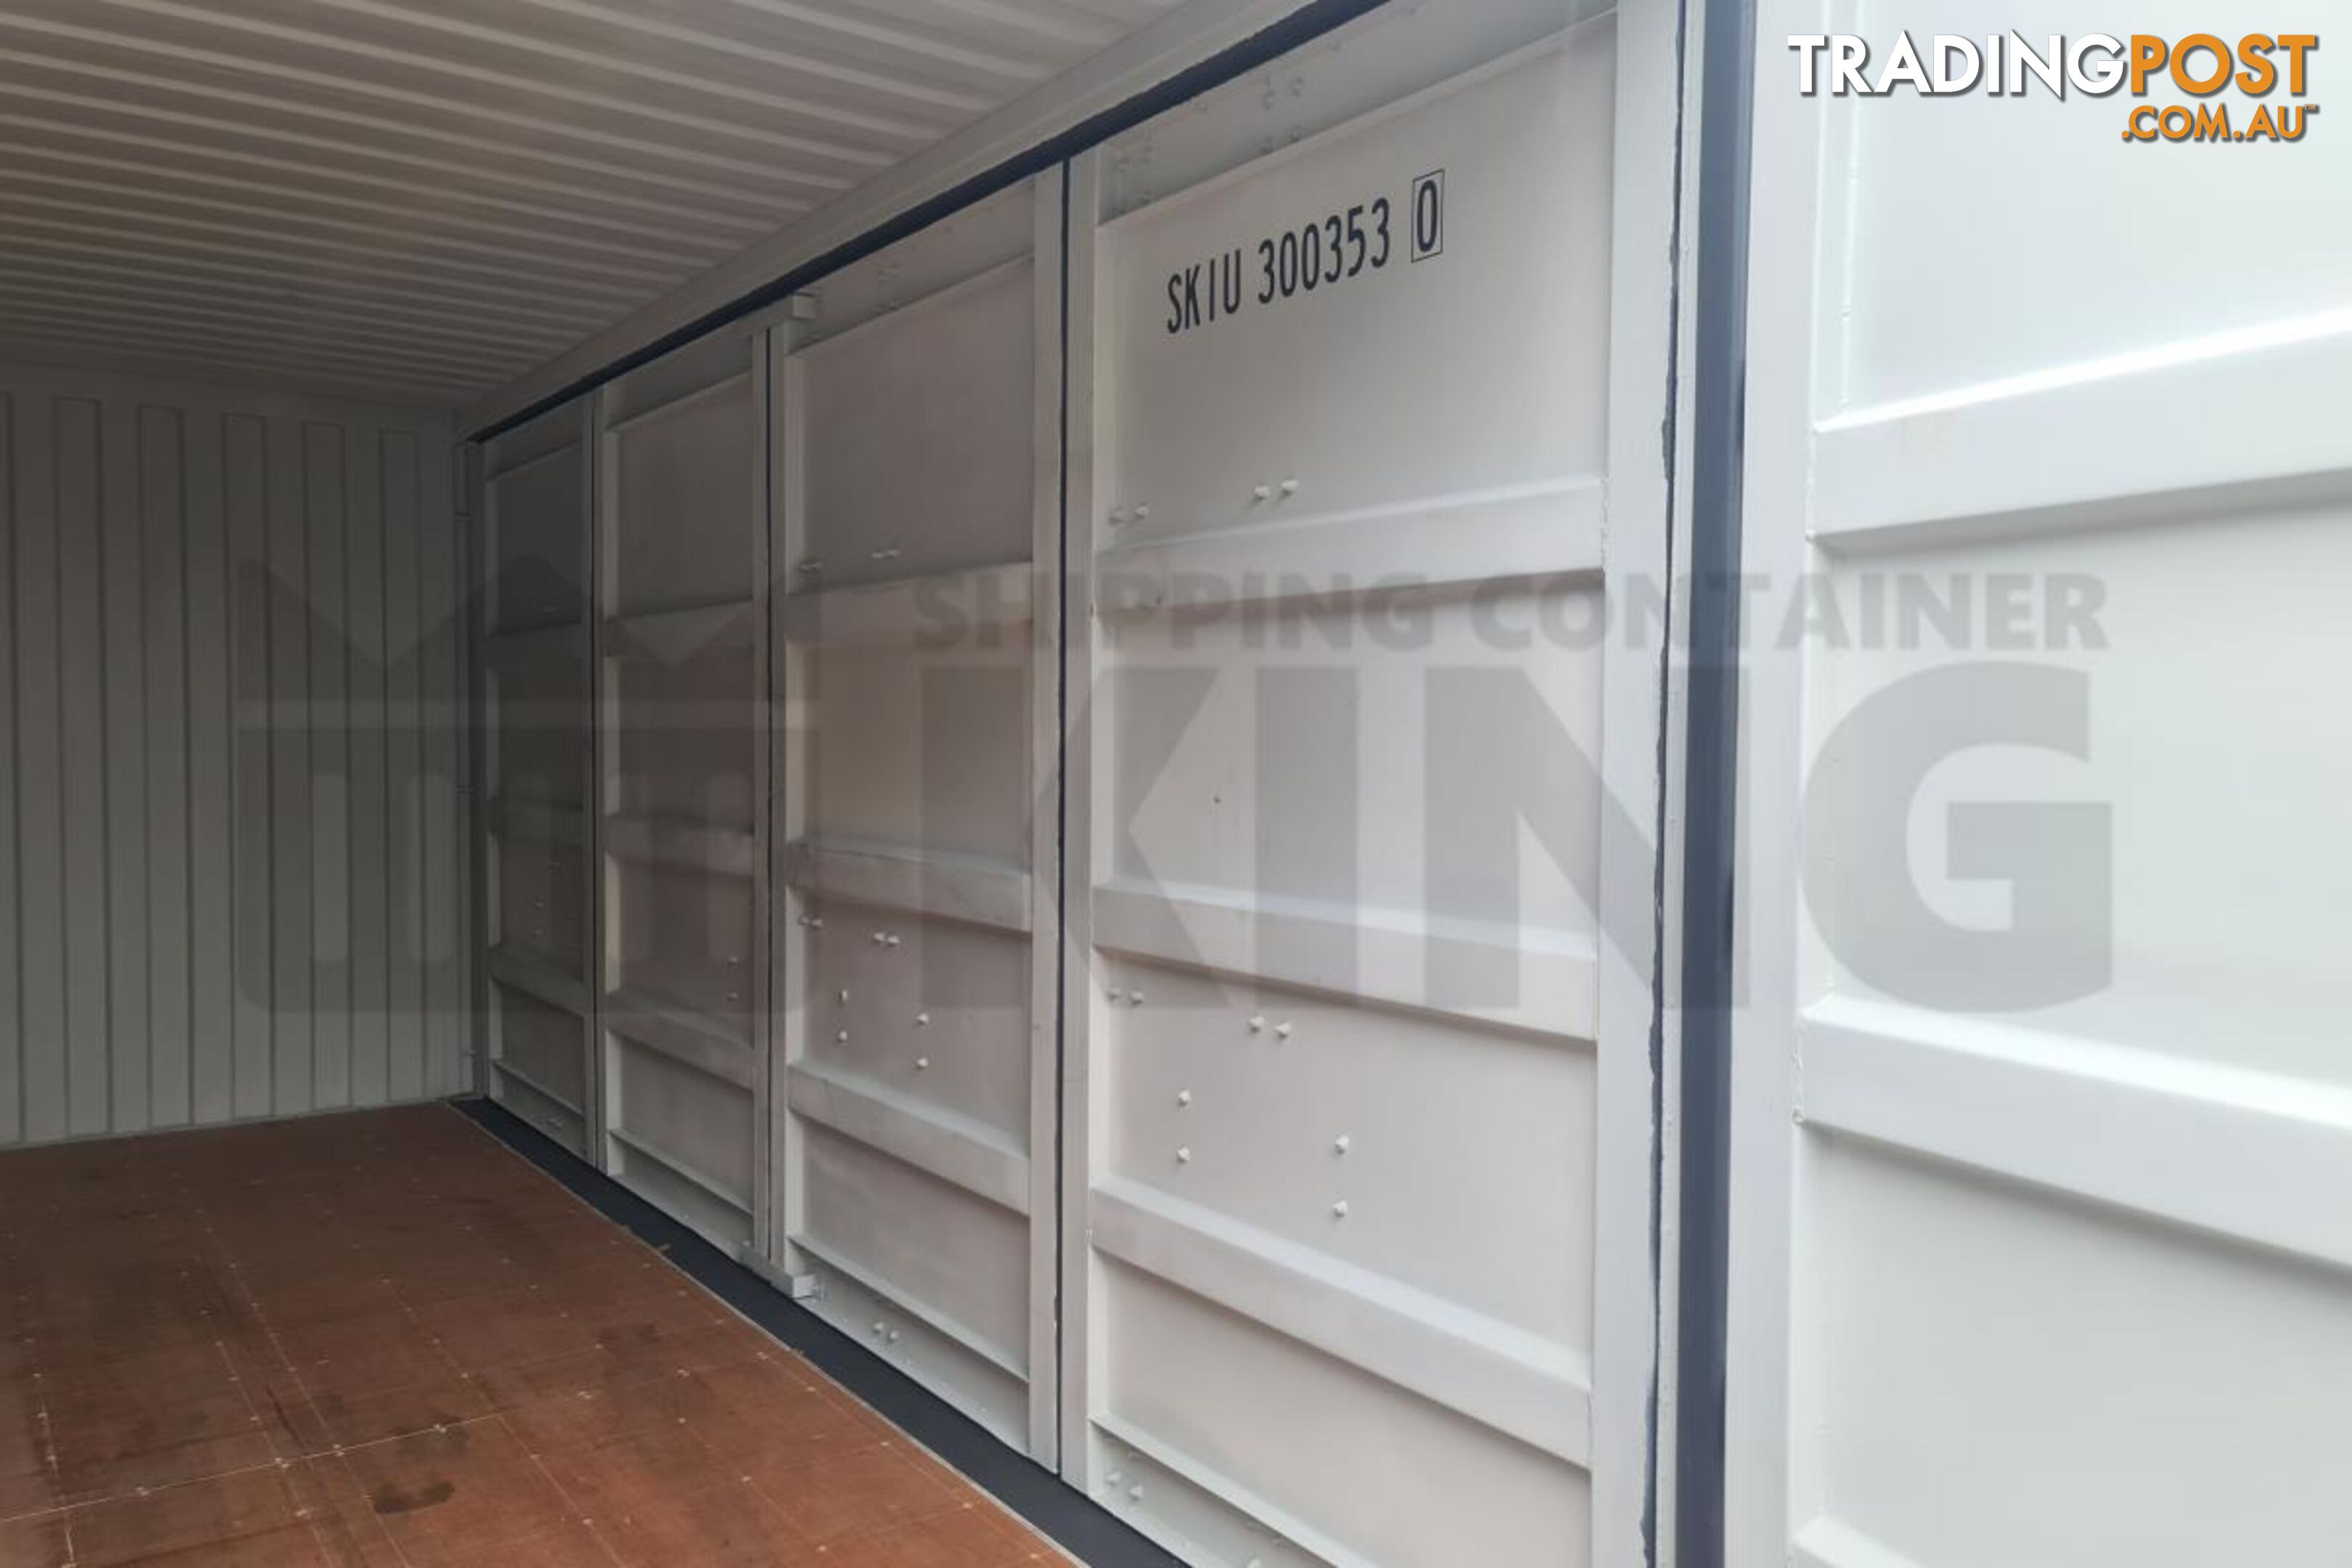 20' HIGH CUBE FULL SIDE OPENING SHIPPING CONTAINER - in Toowoomba